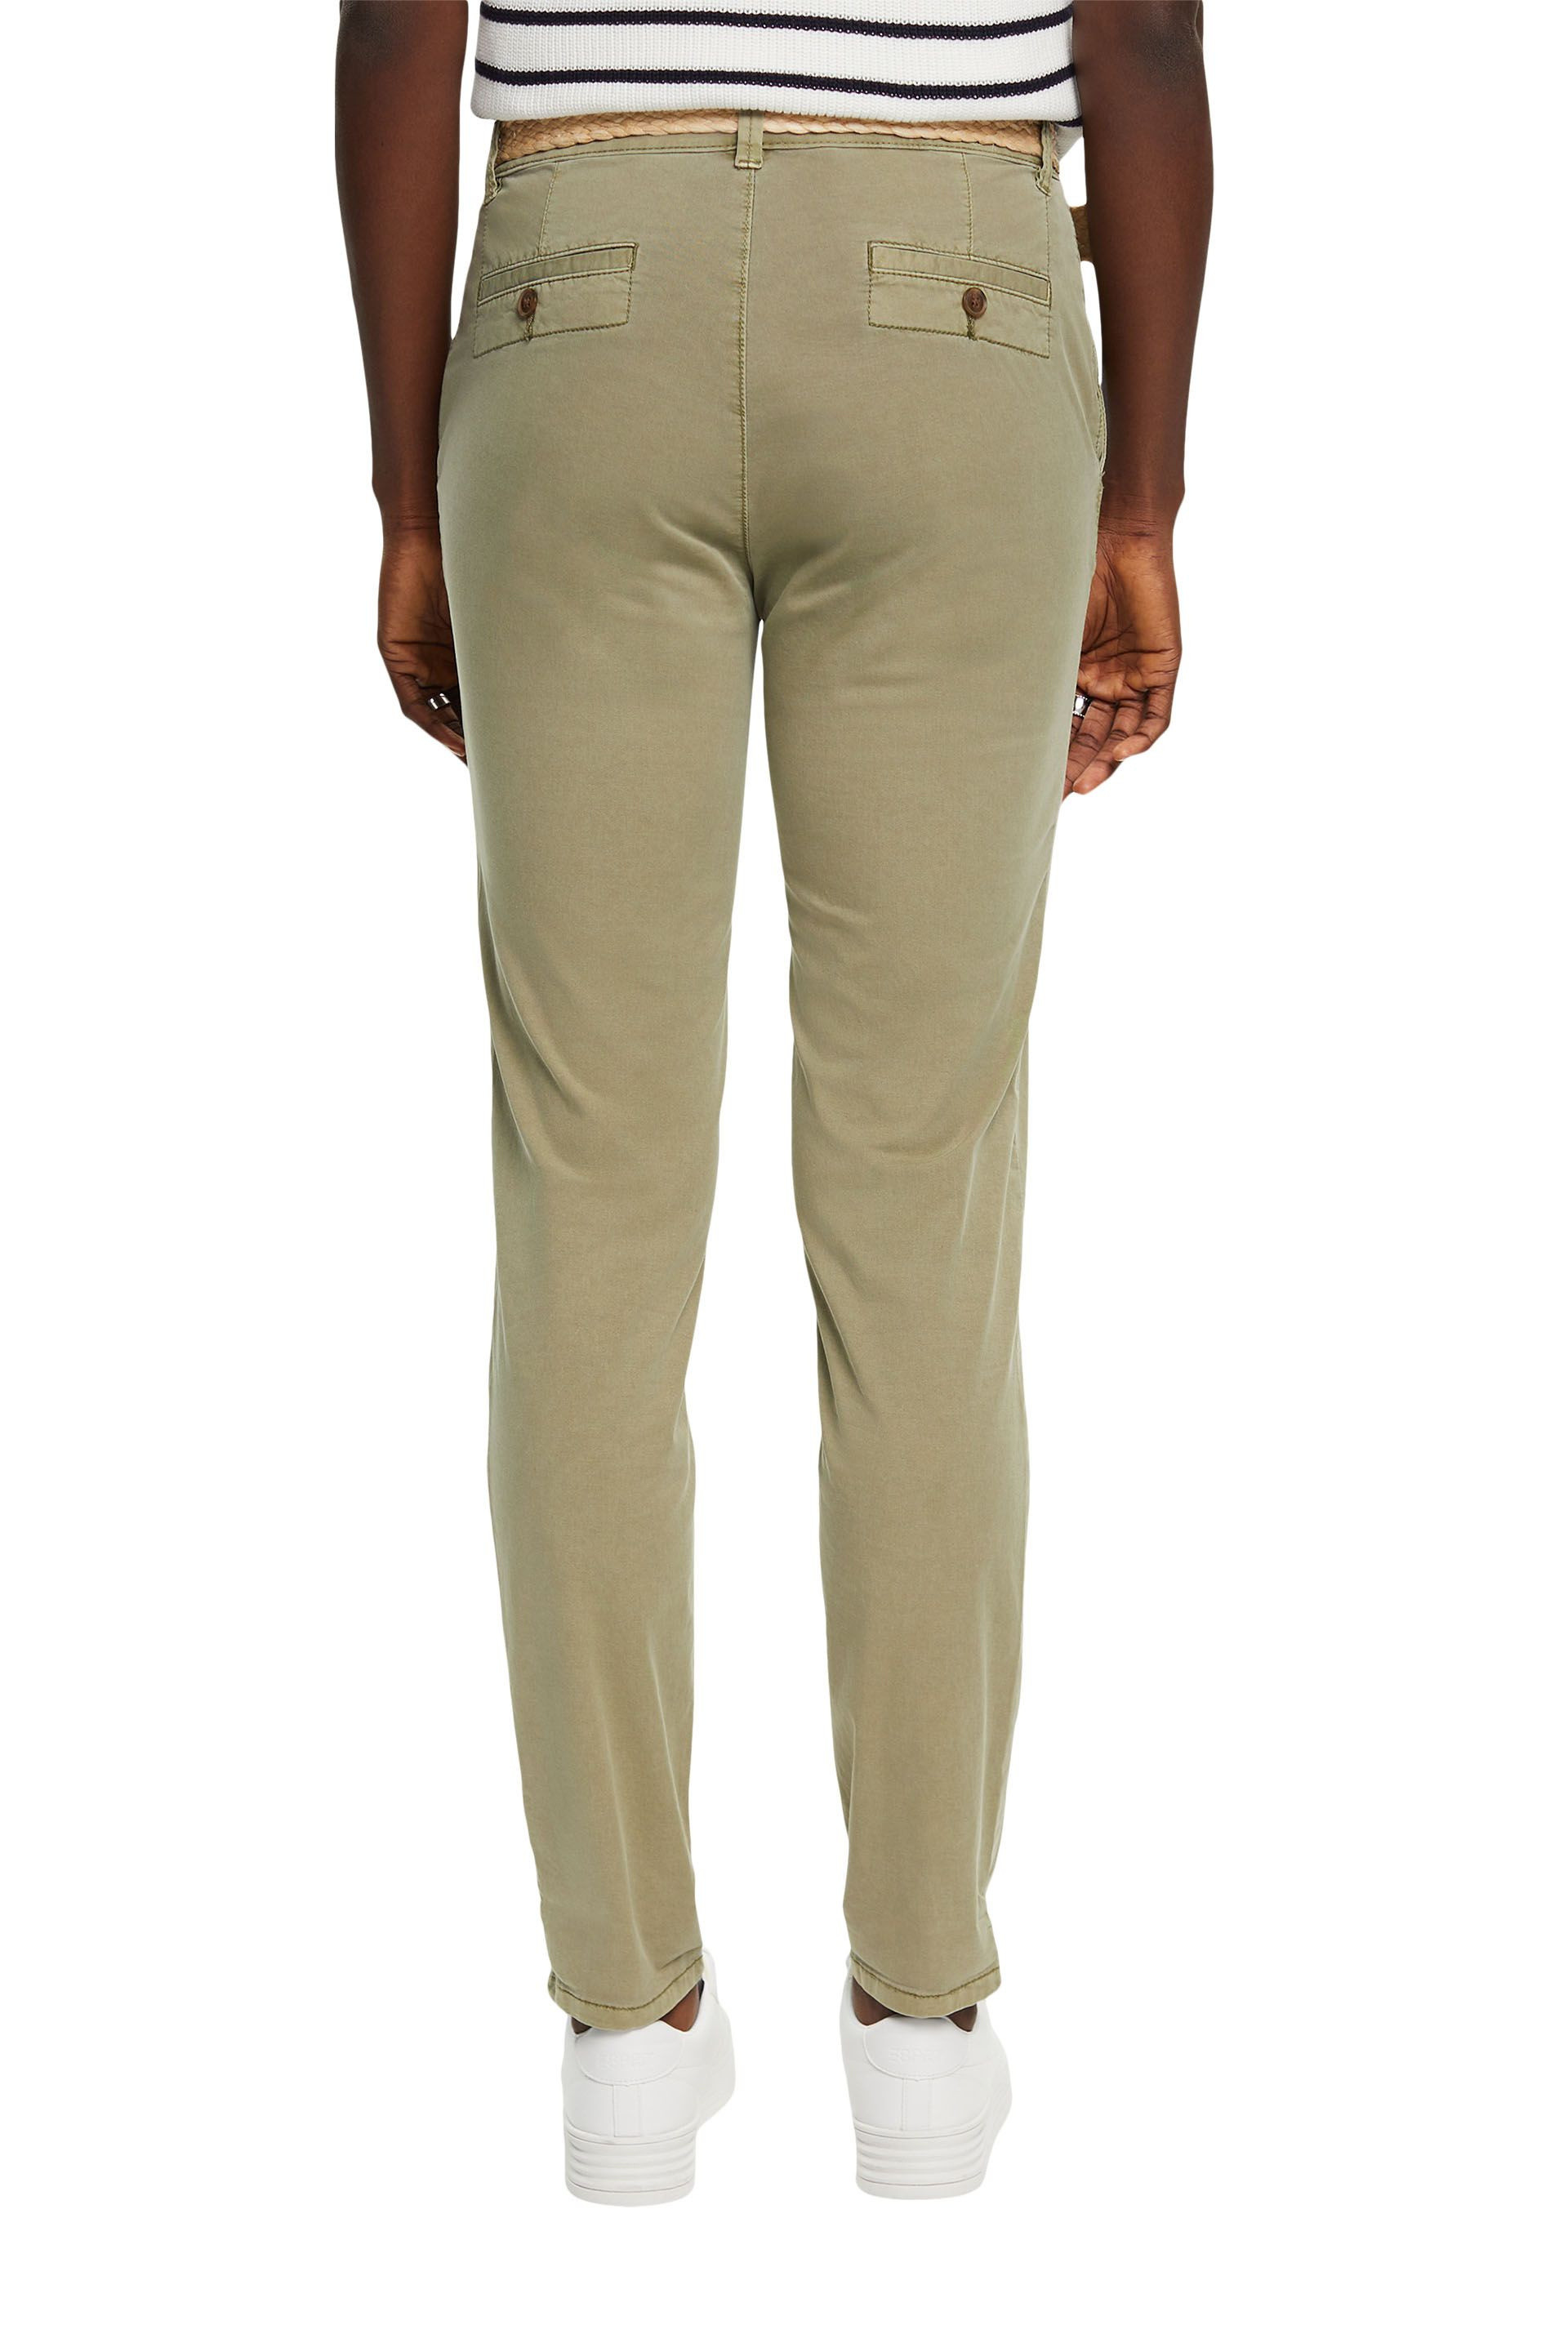 Esprit - Cropped chinos with belt, Sage Green, large image number 2